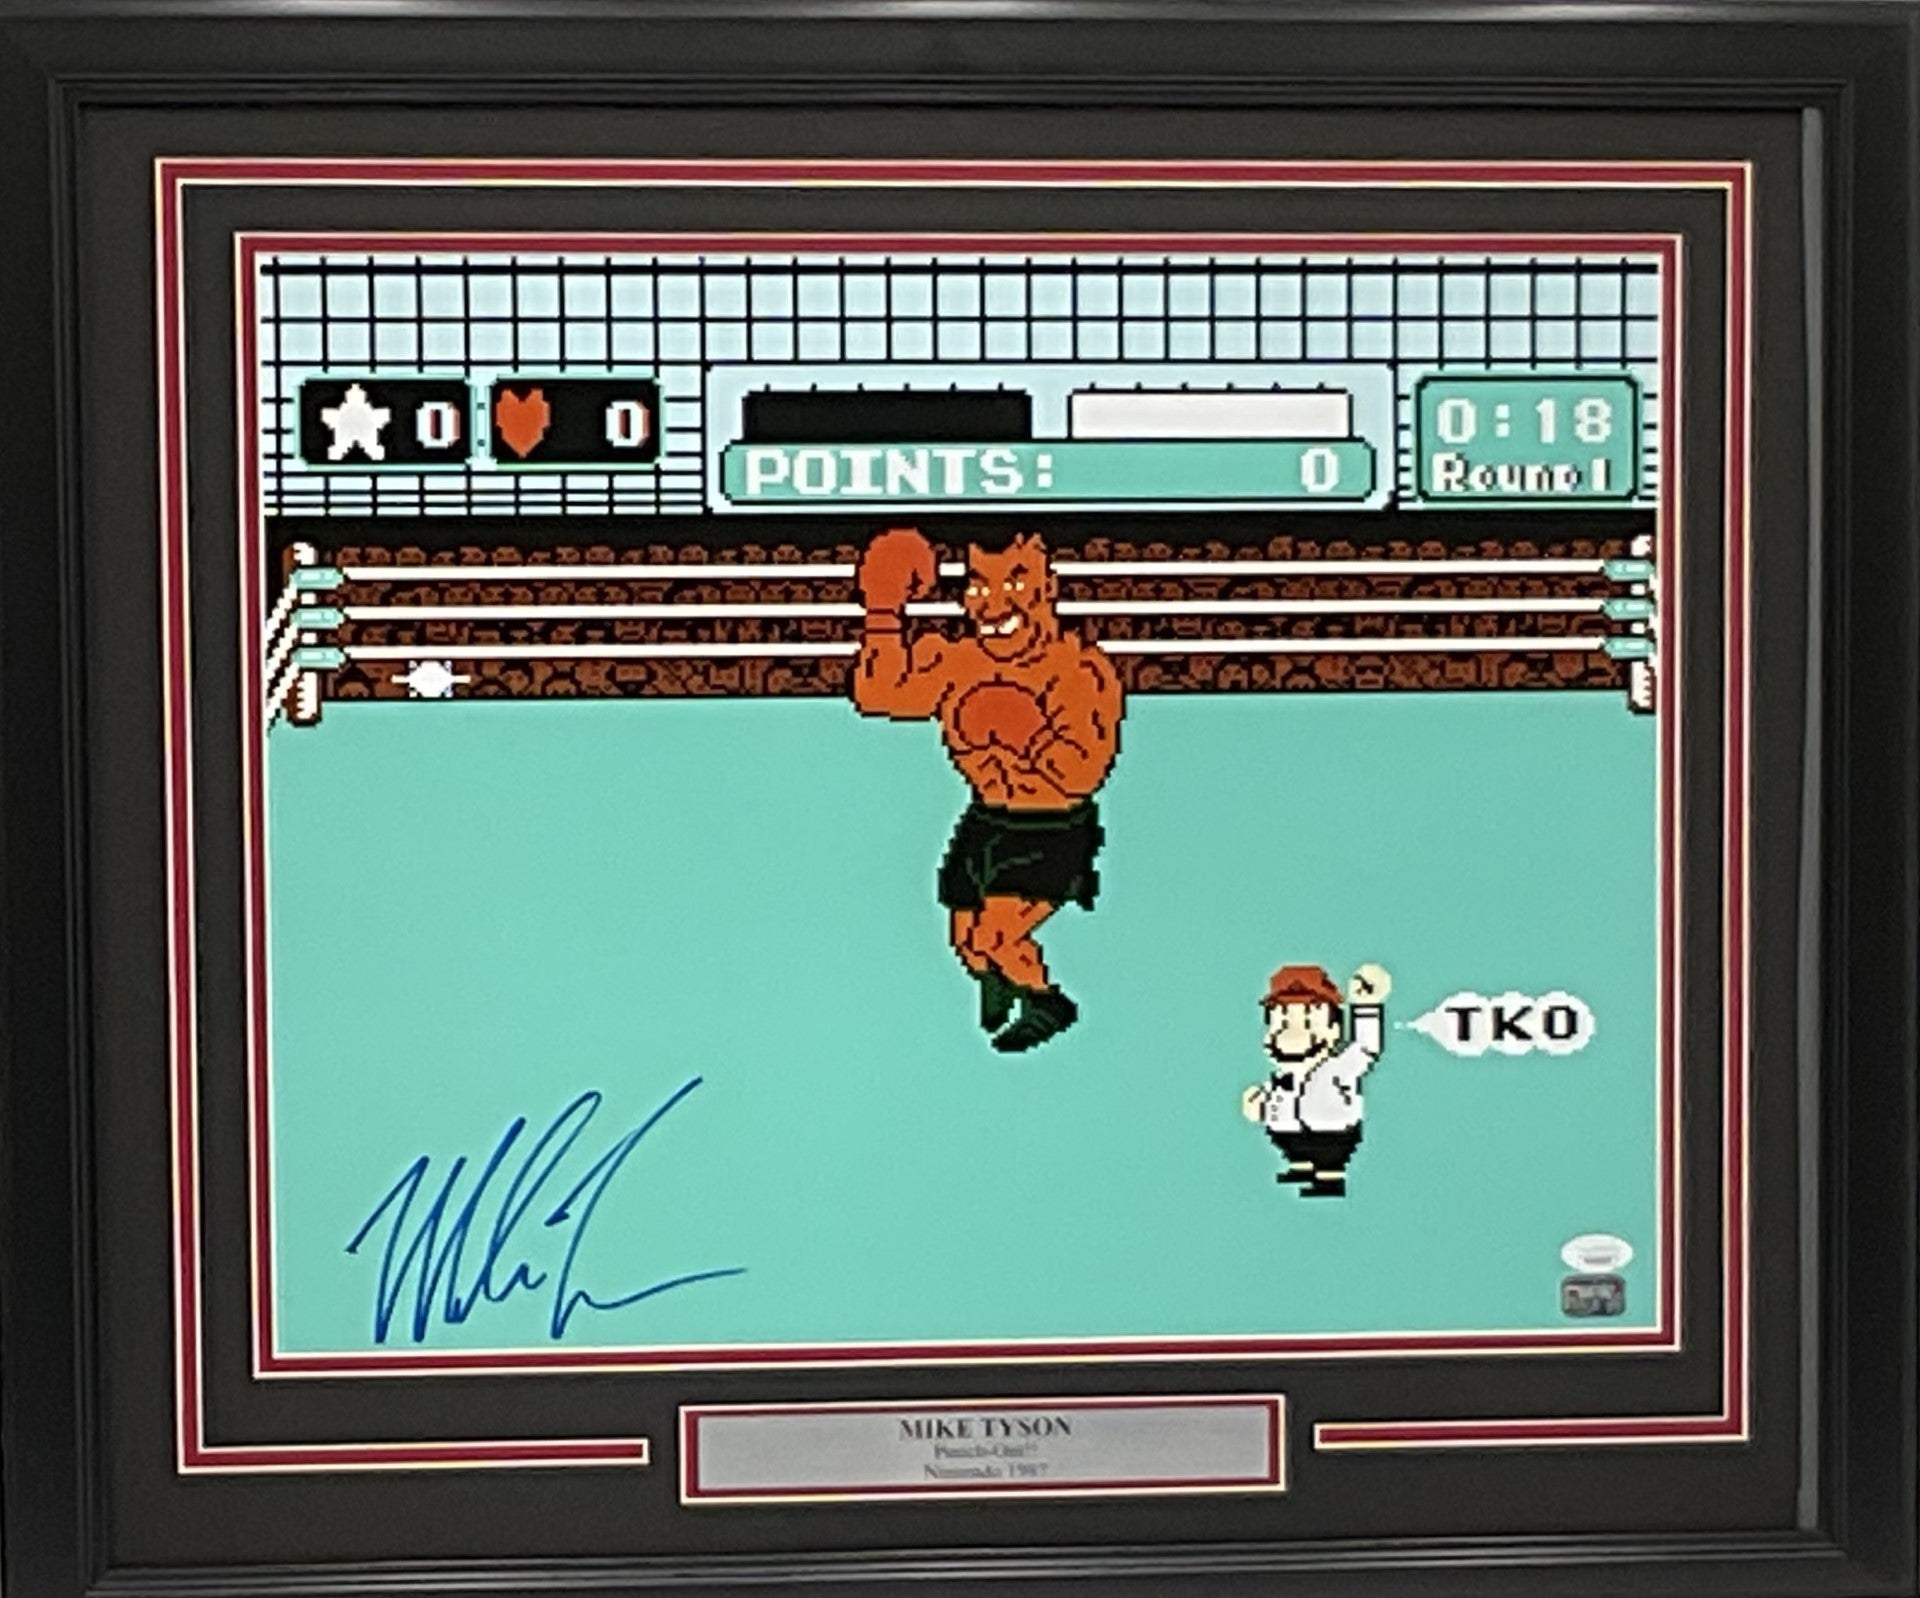 Mike Tyson Autographed 16x20 "Punch Out" Photo Framed